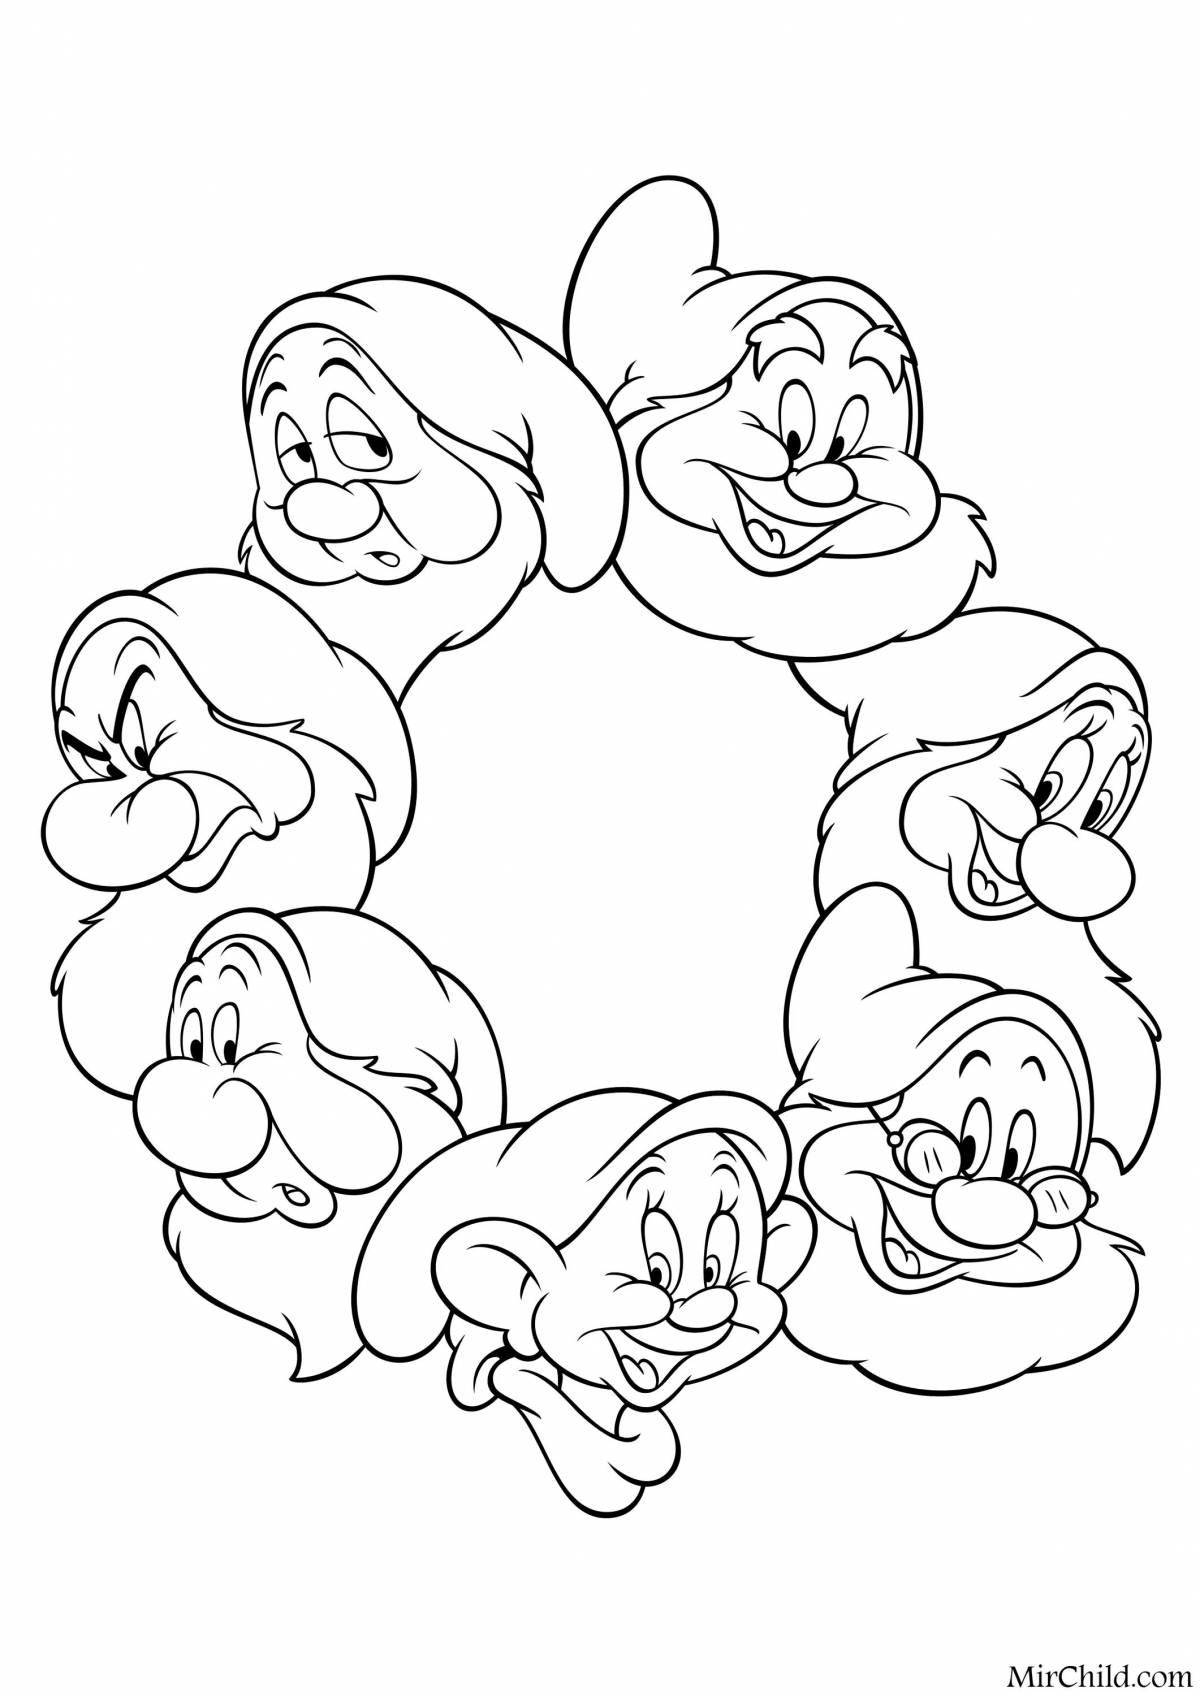 Glowing seven dwarfs coloring page